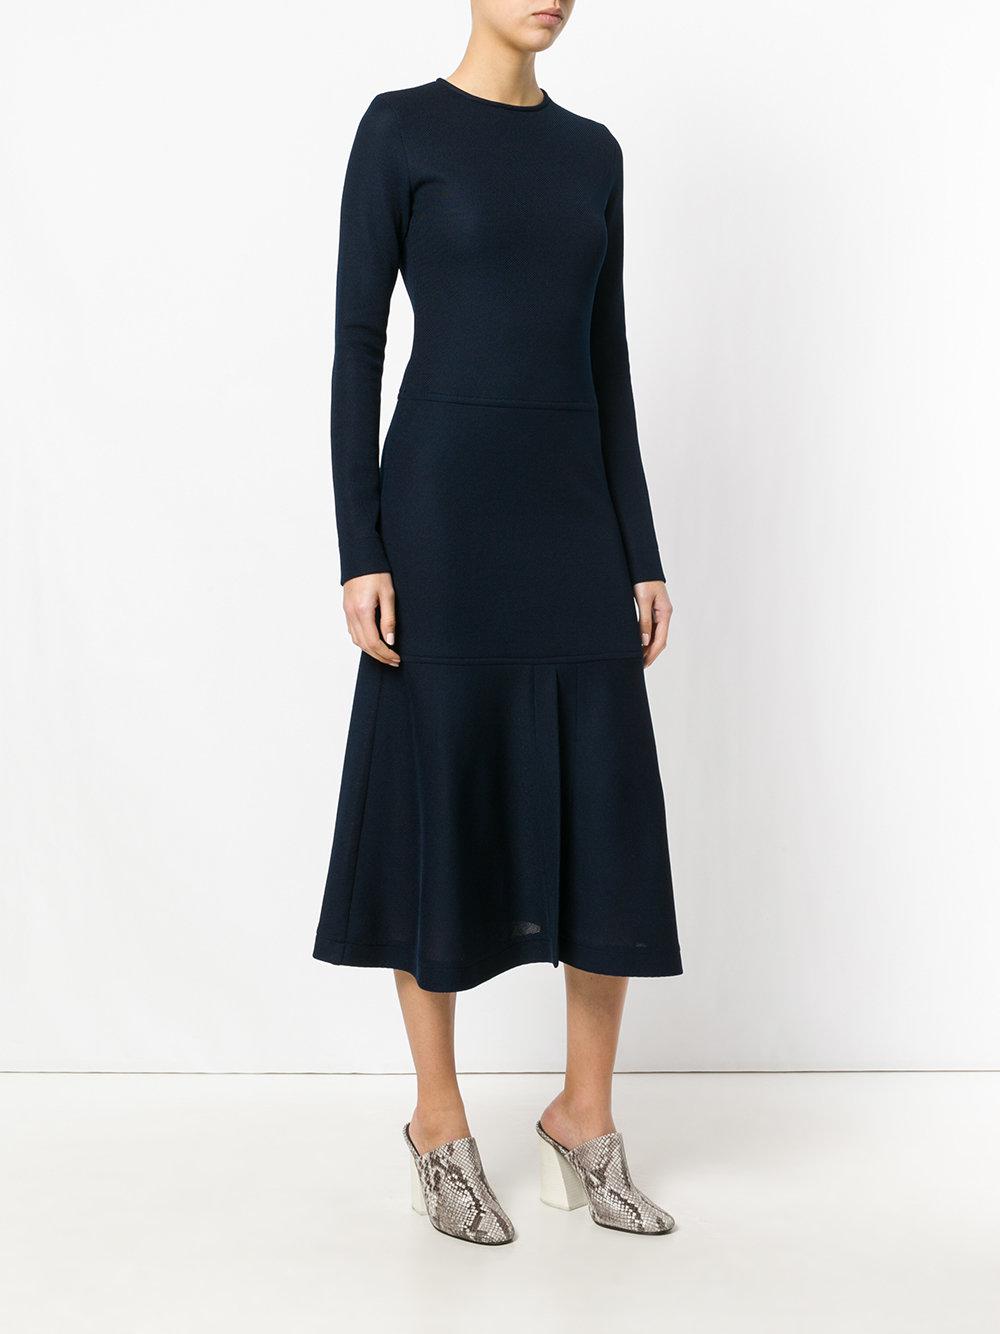 ODEEH Synthetic Slight Flared Dress in Blue - Lyst